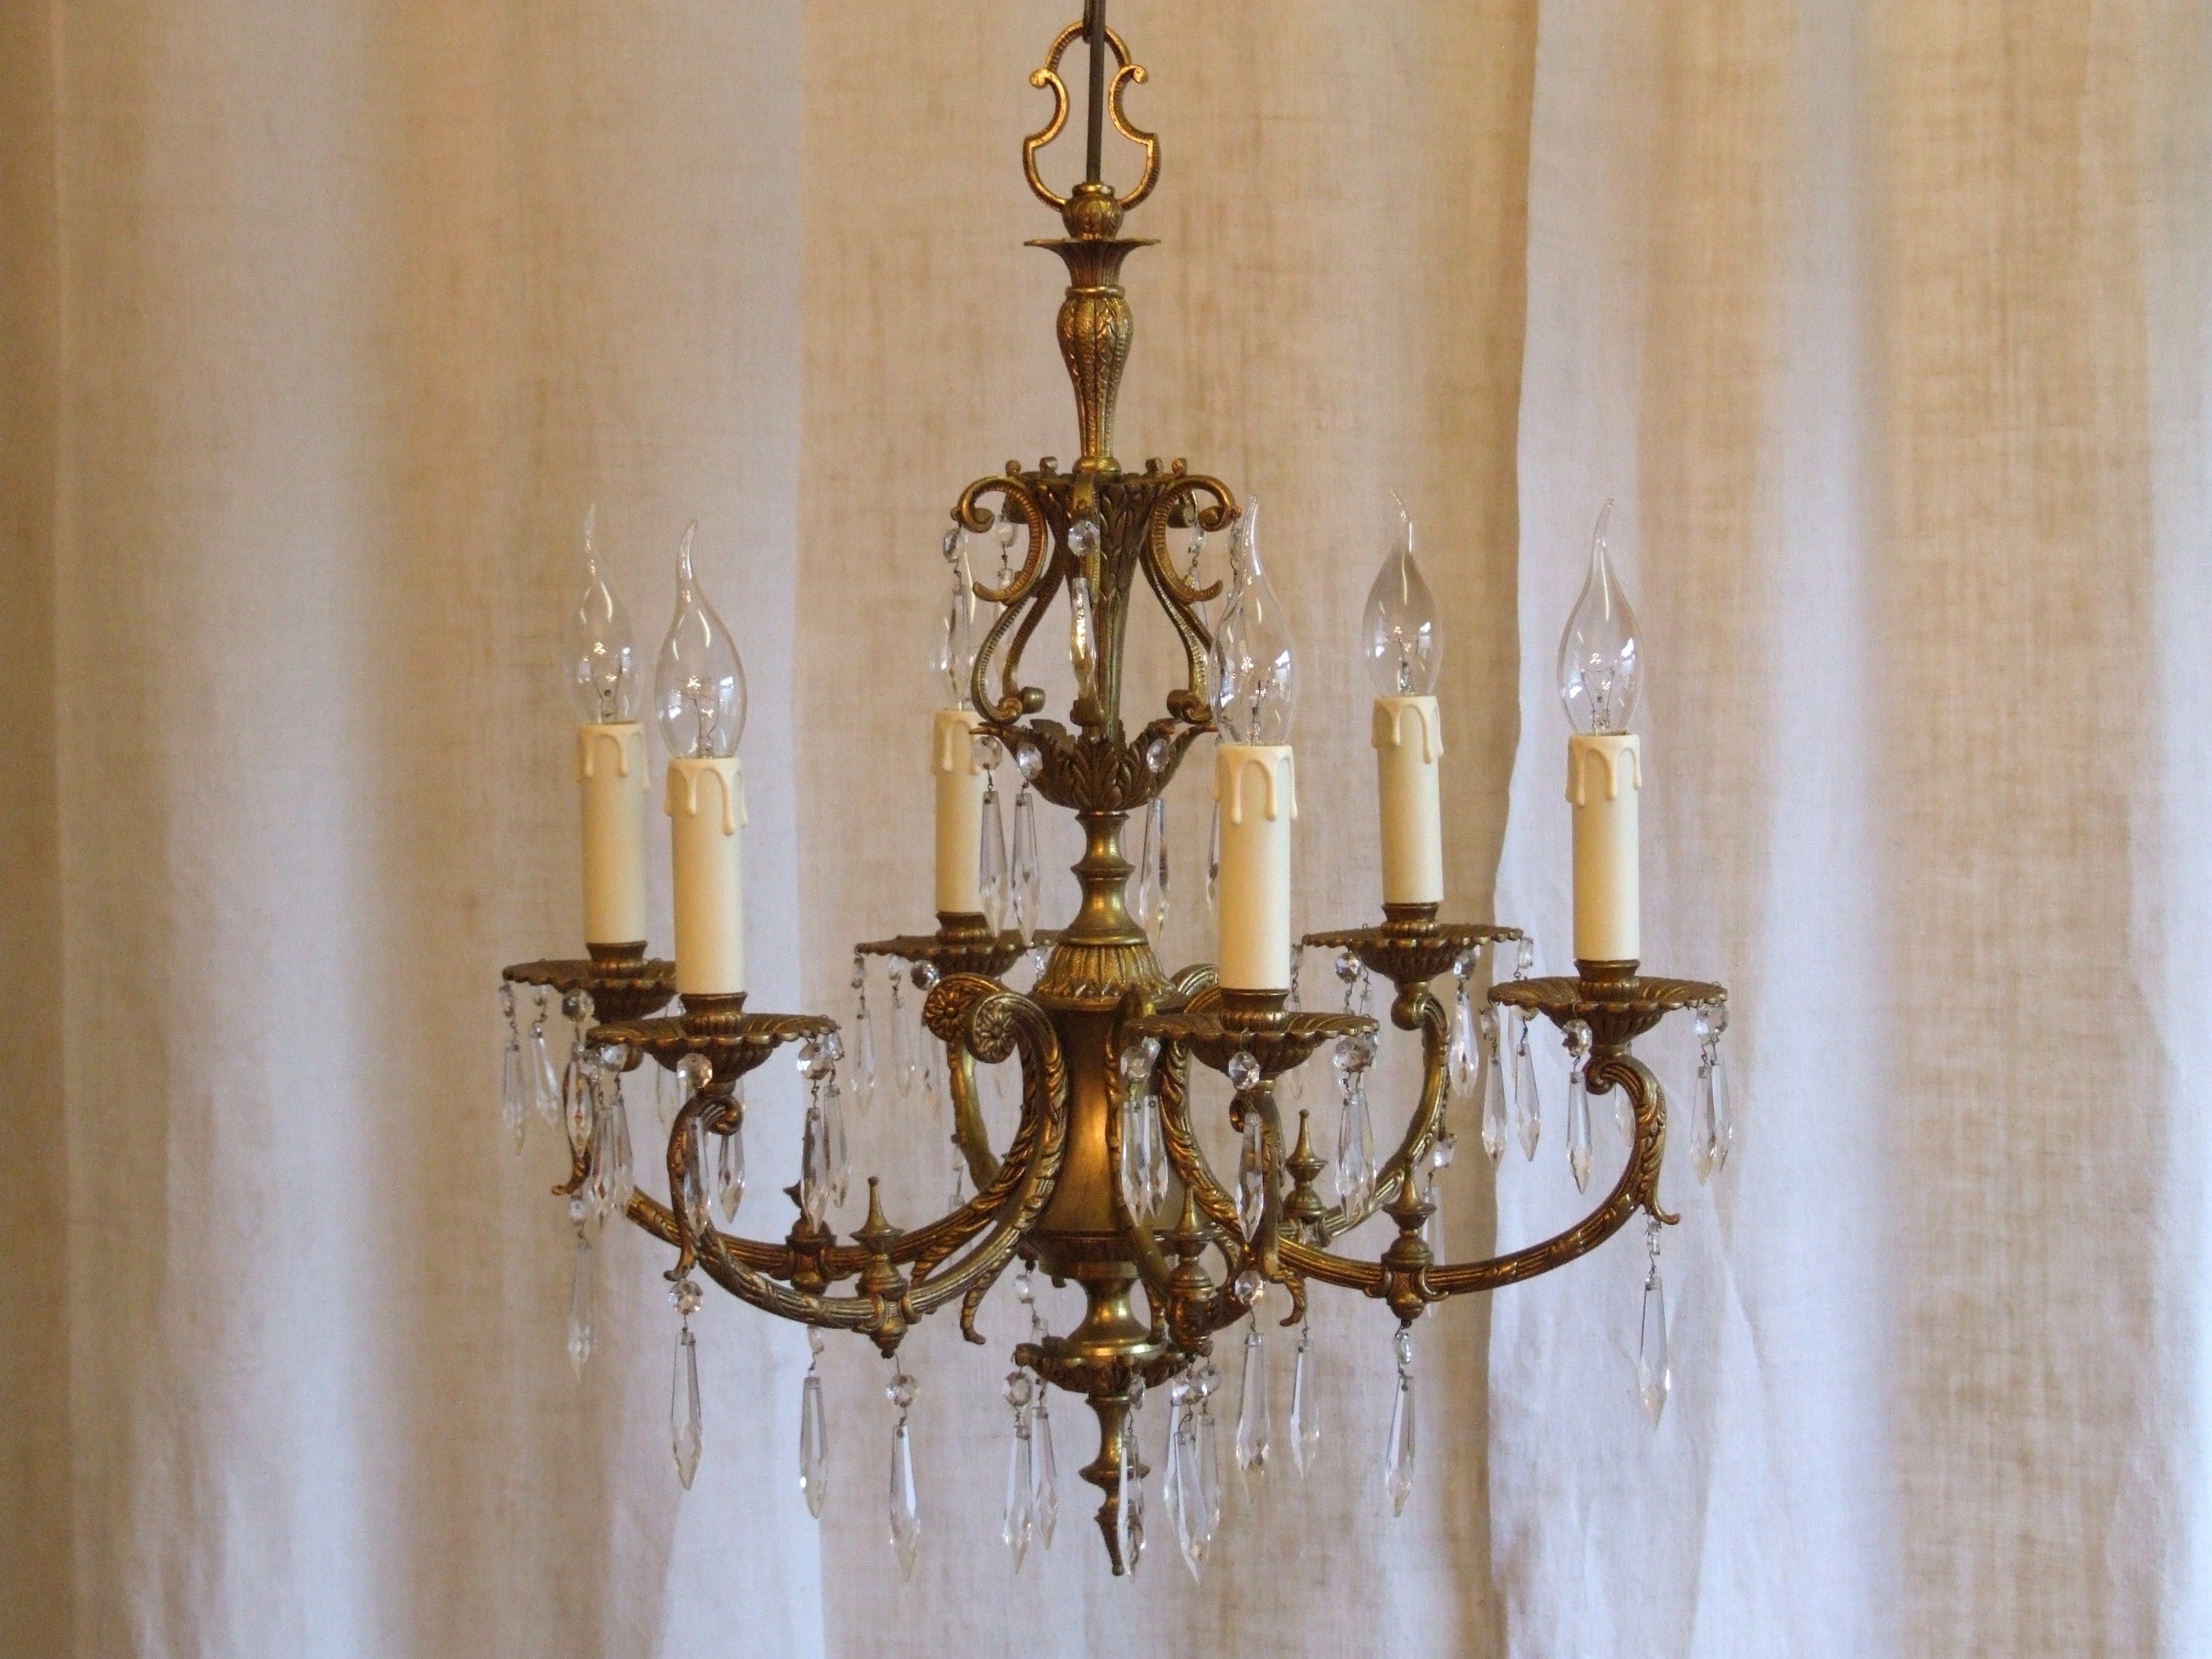 Popular Vintage Italian Chandeliers For Chandeliers : Amazing Italian Chandeliers Unique Chandeliers Made In (View 5 of 15)